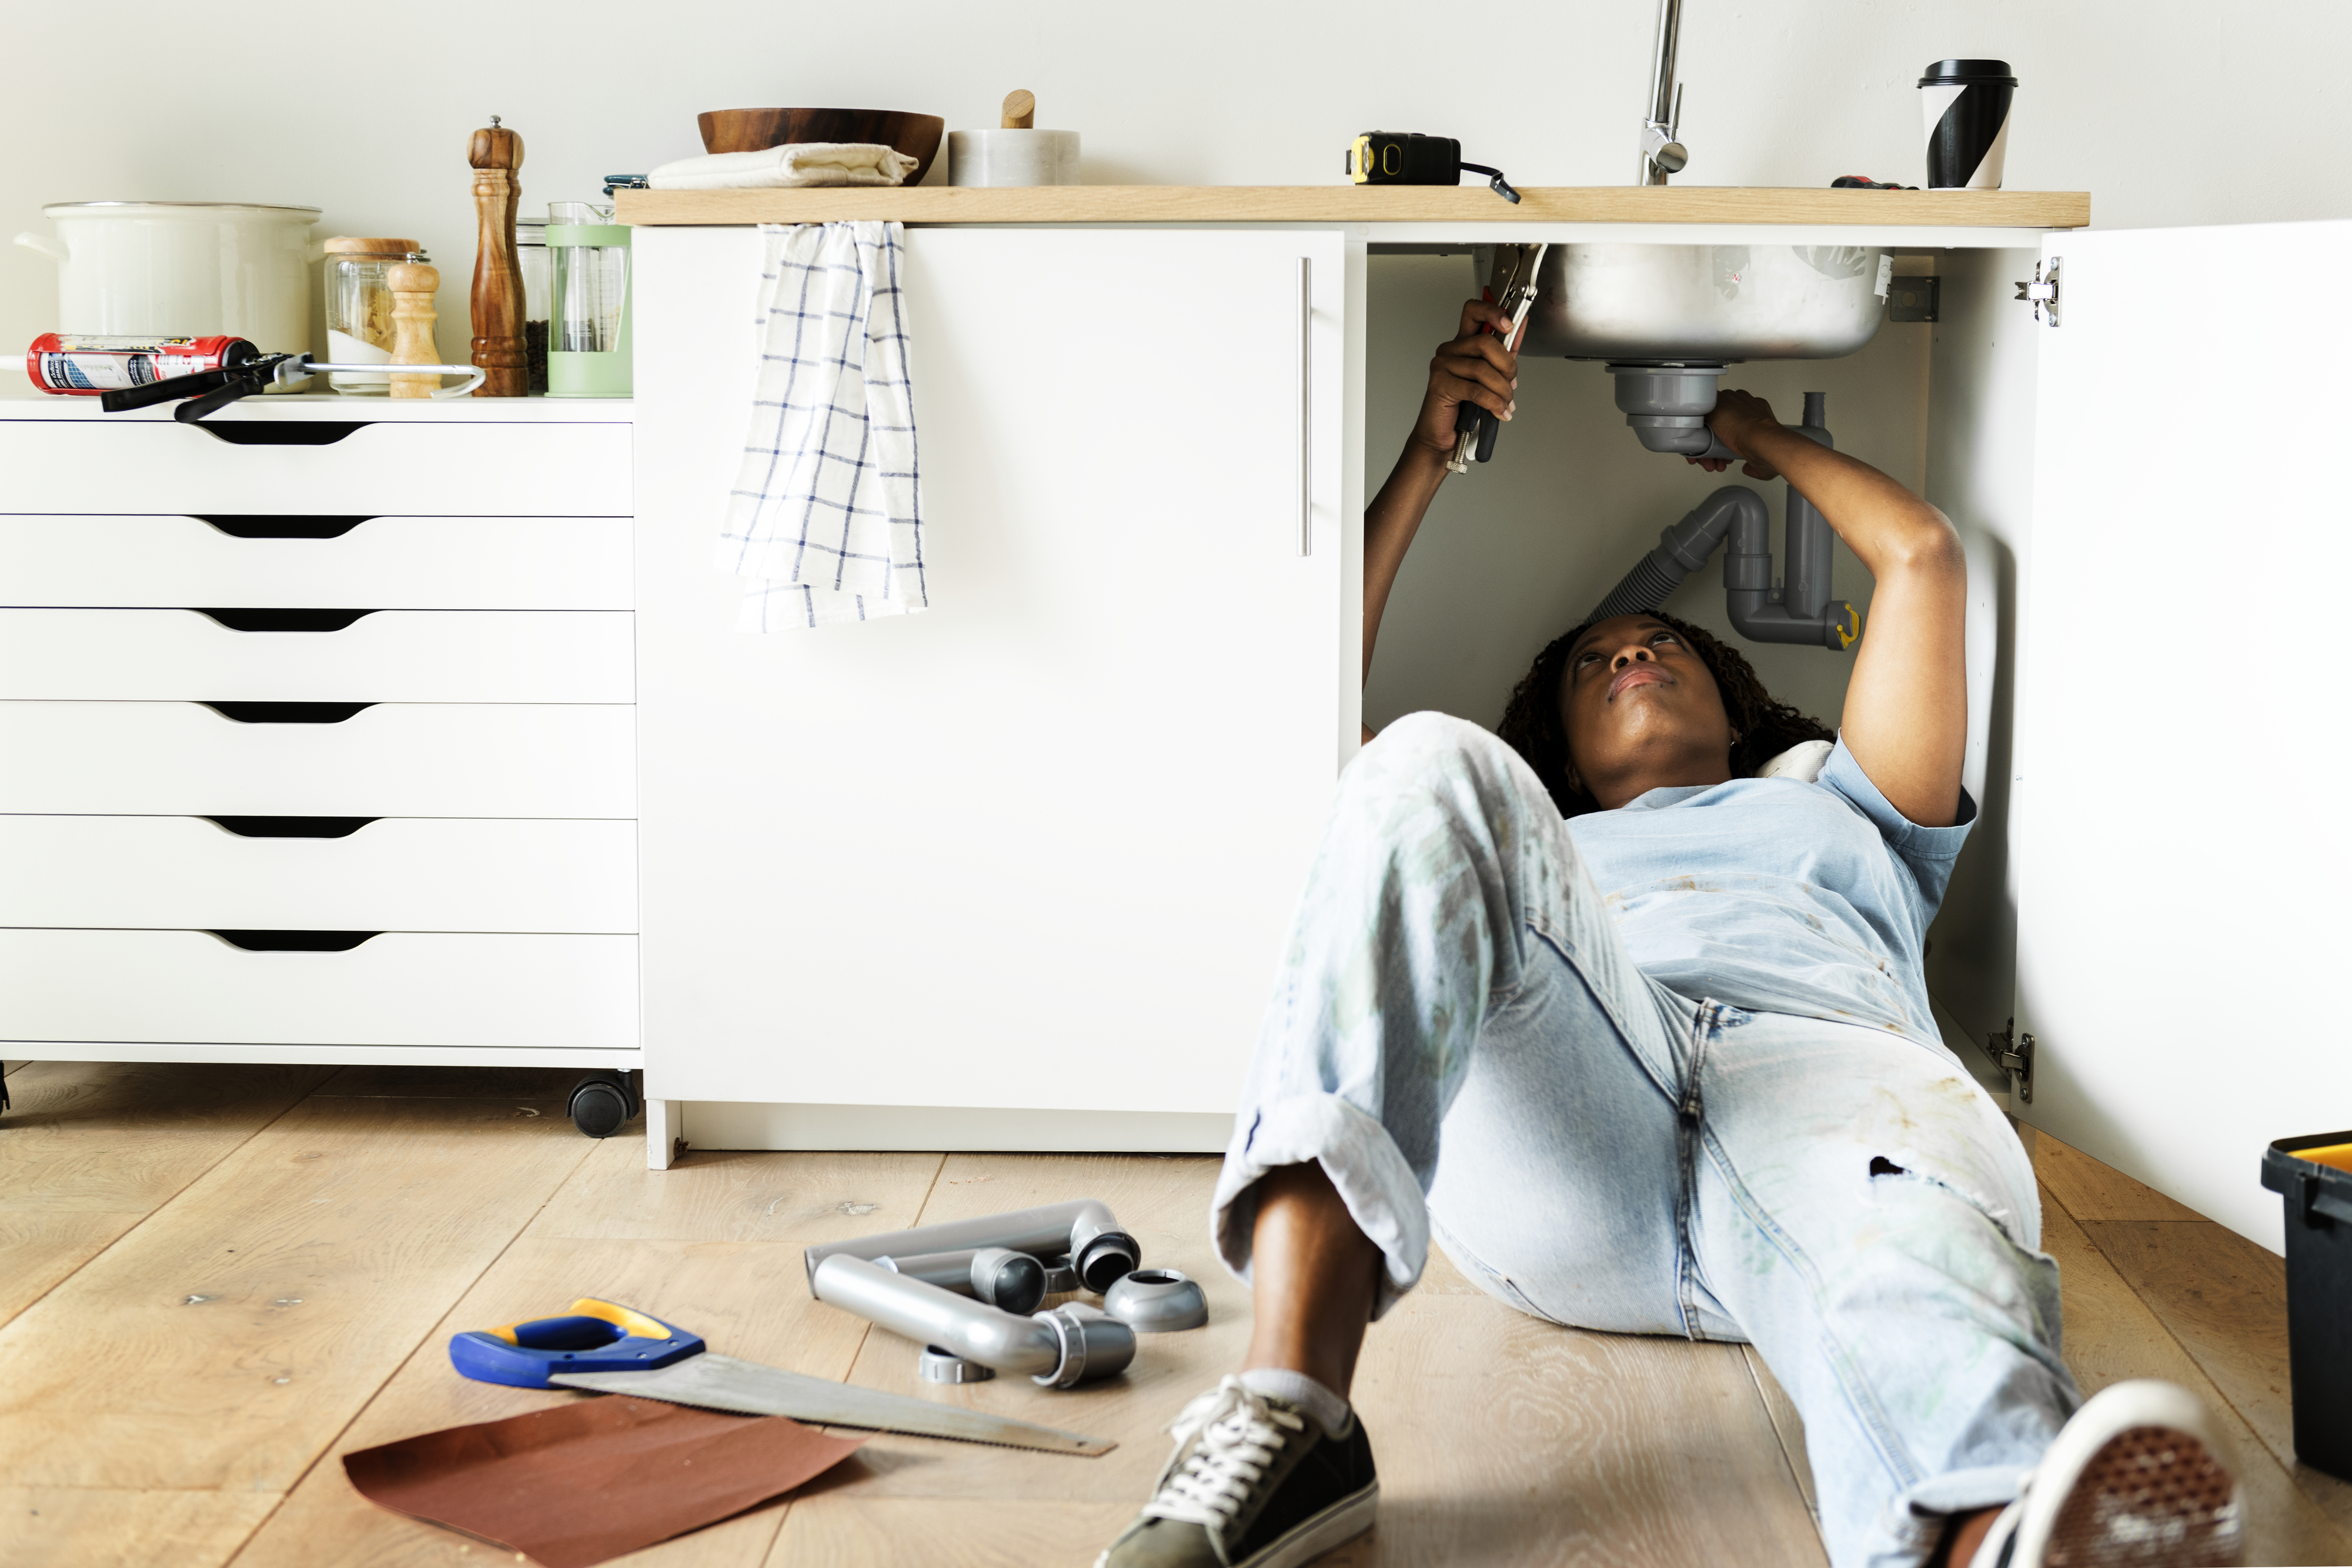 Person lying on floor using a wrench under a sink, with tools scattered around